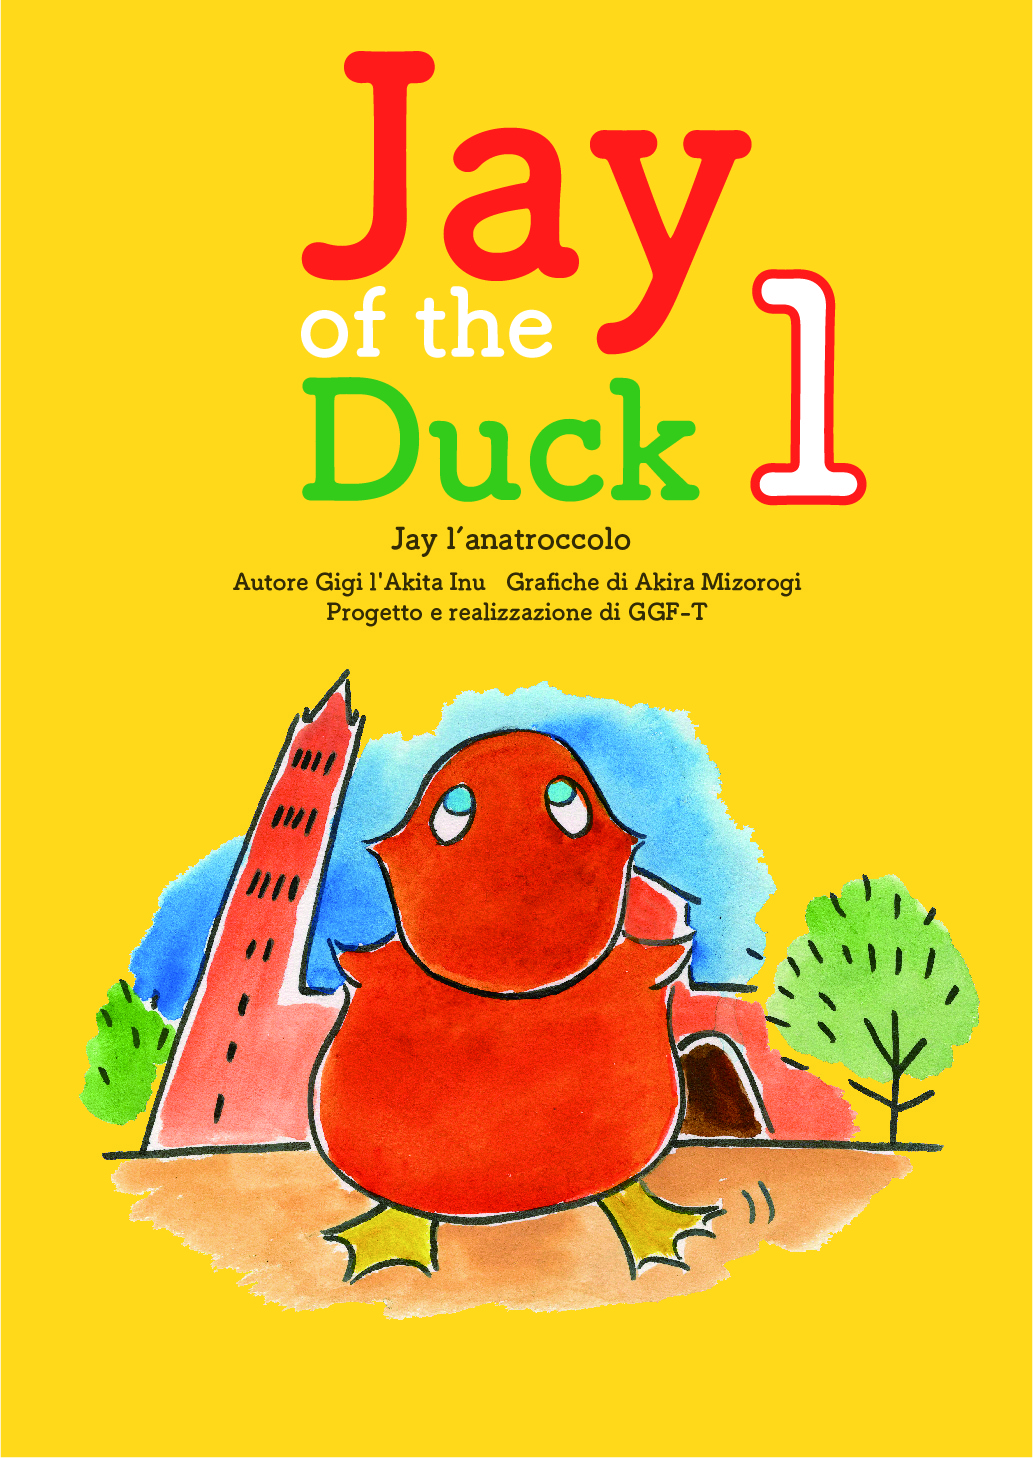 Jay of the Duck 1【限定200冊 】発売開始のお知らせ